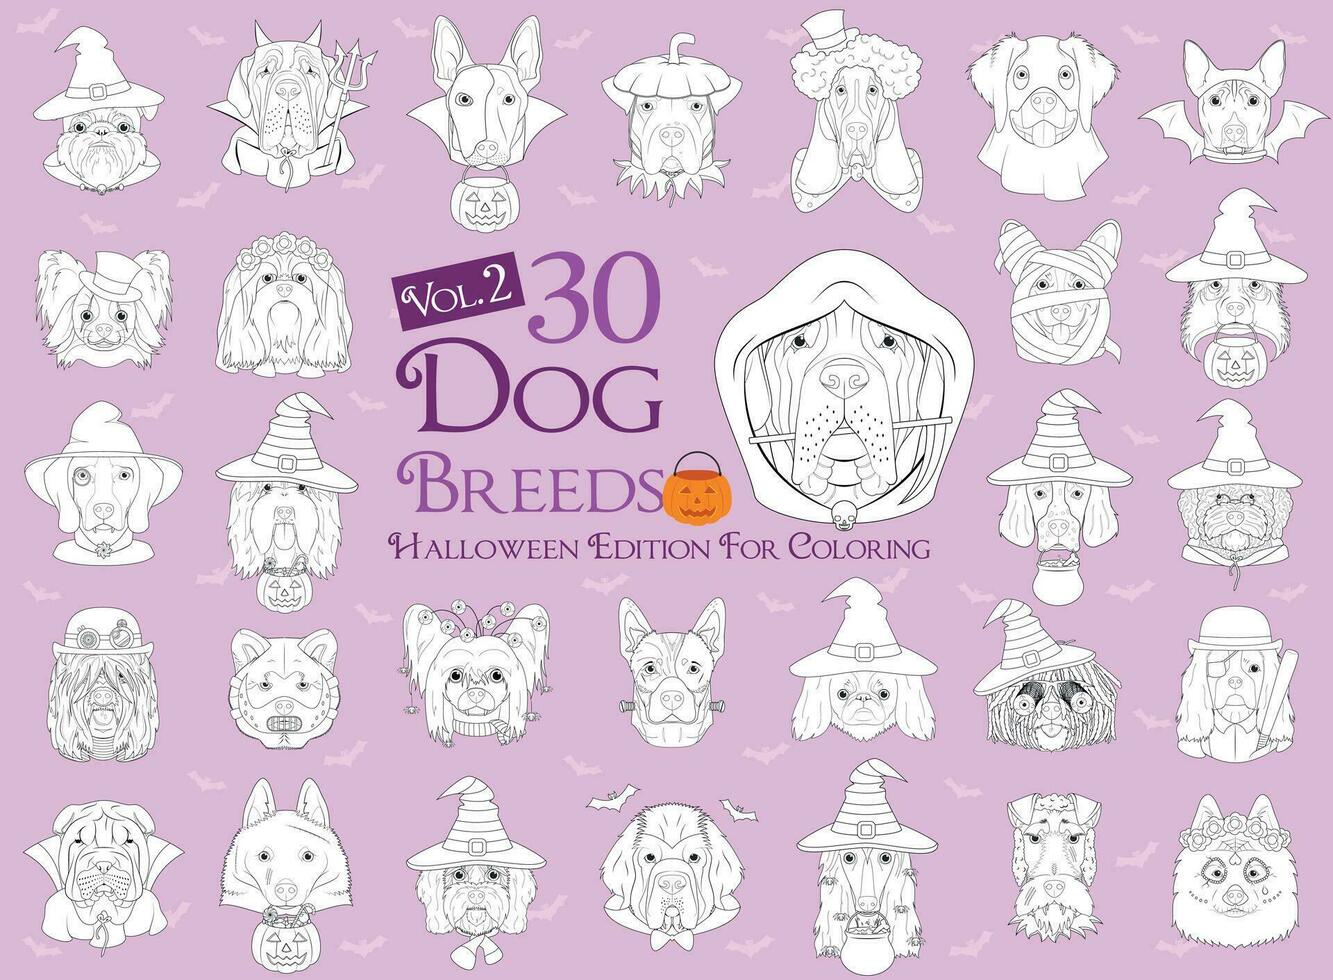 Set of 30 dog breeds with Halloween costumes for coloring. Set 2 vector